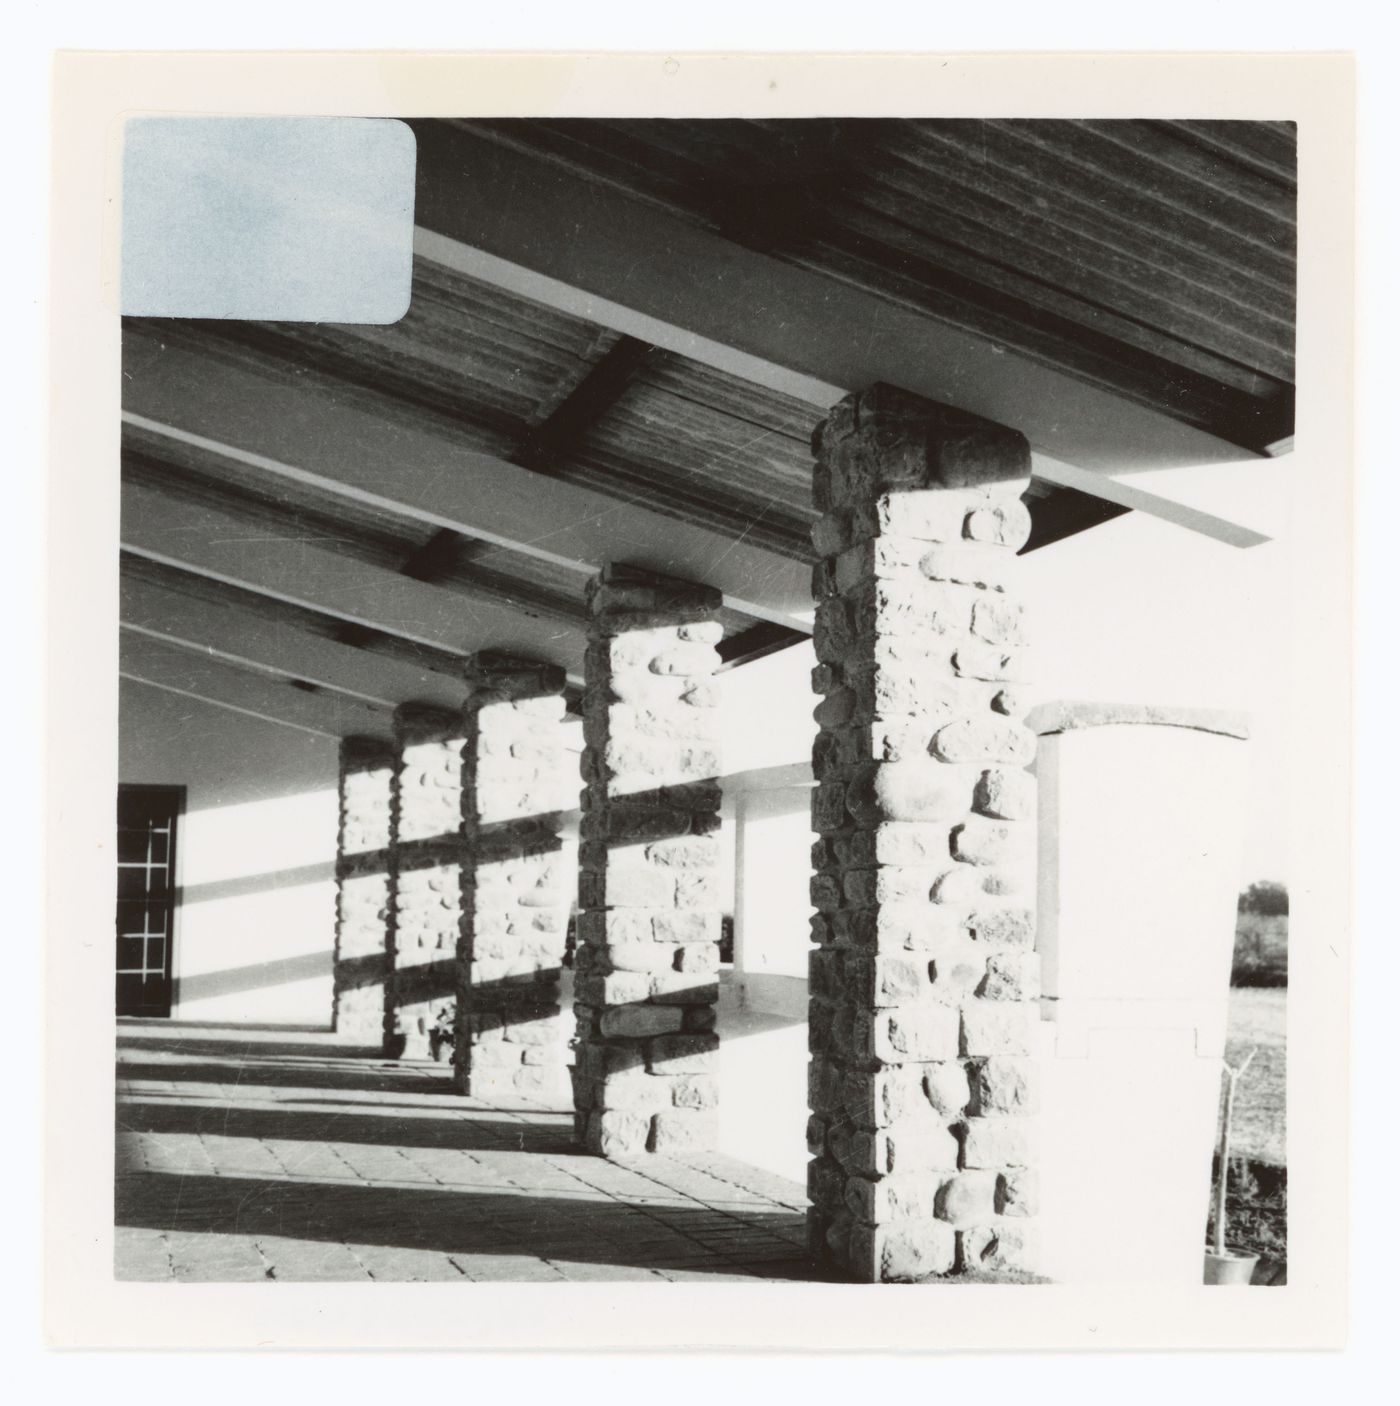 Detail view of a roof with beams and columns, possibly of the Architect's Office, Sector 19, Chandigarh, India